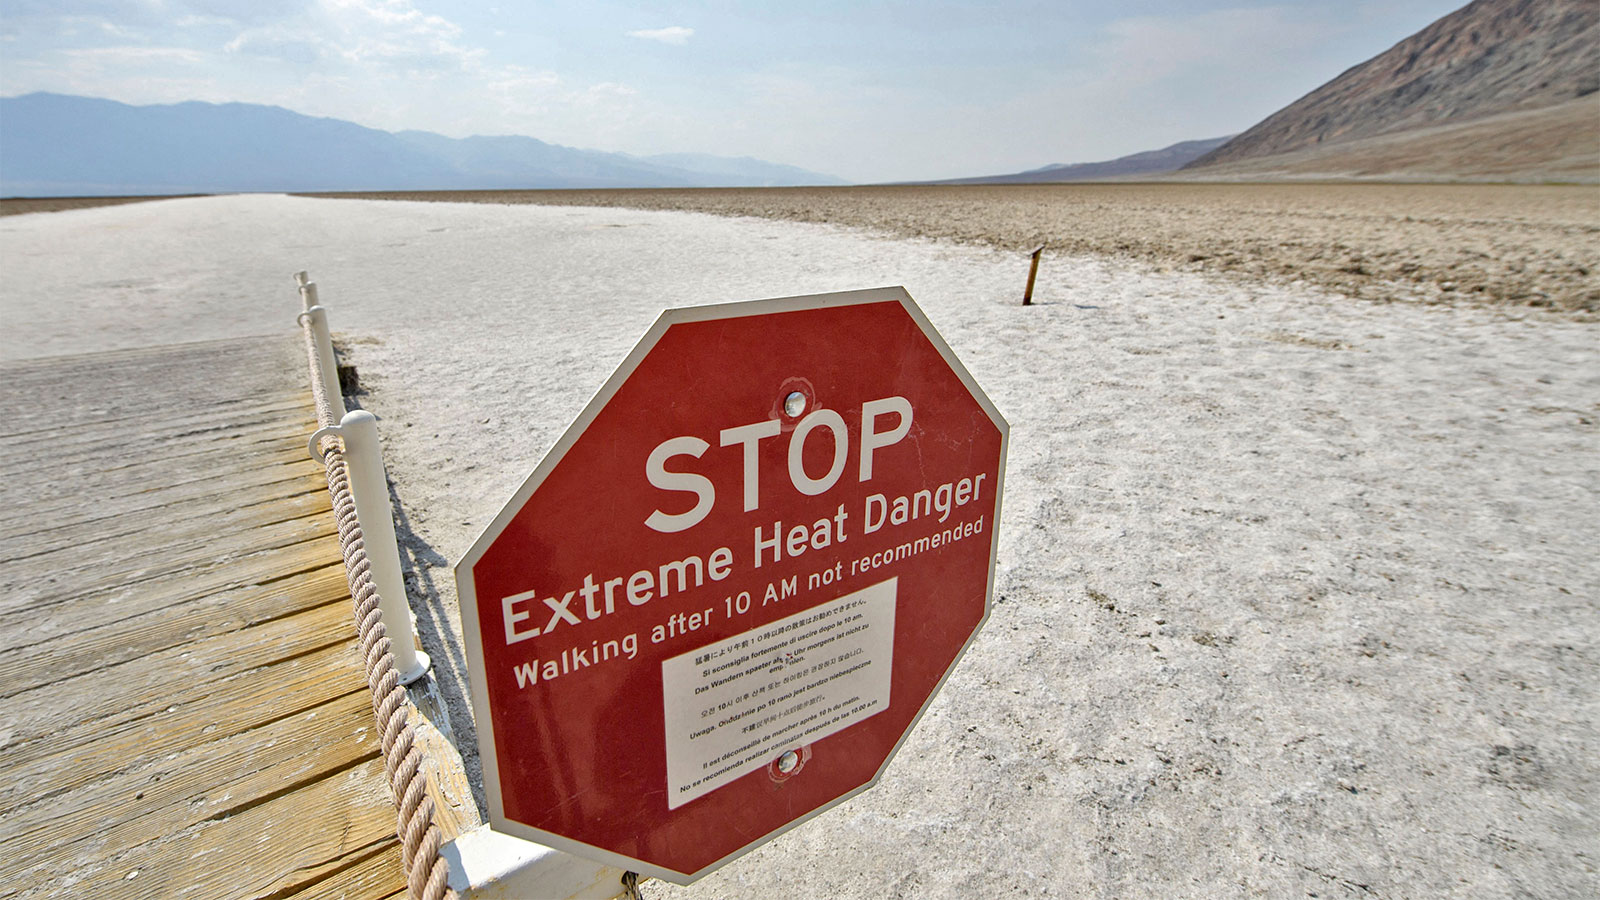 A stop sign warning of extreme heat danger at Death Valley National Park